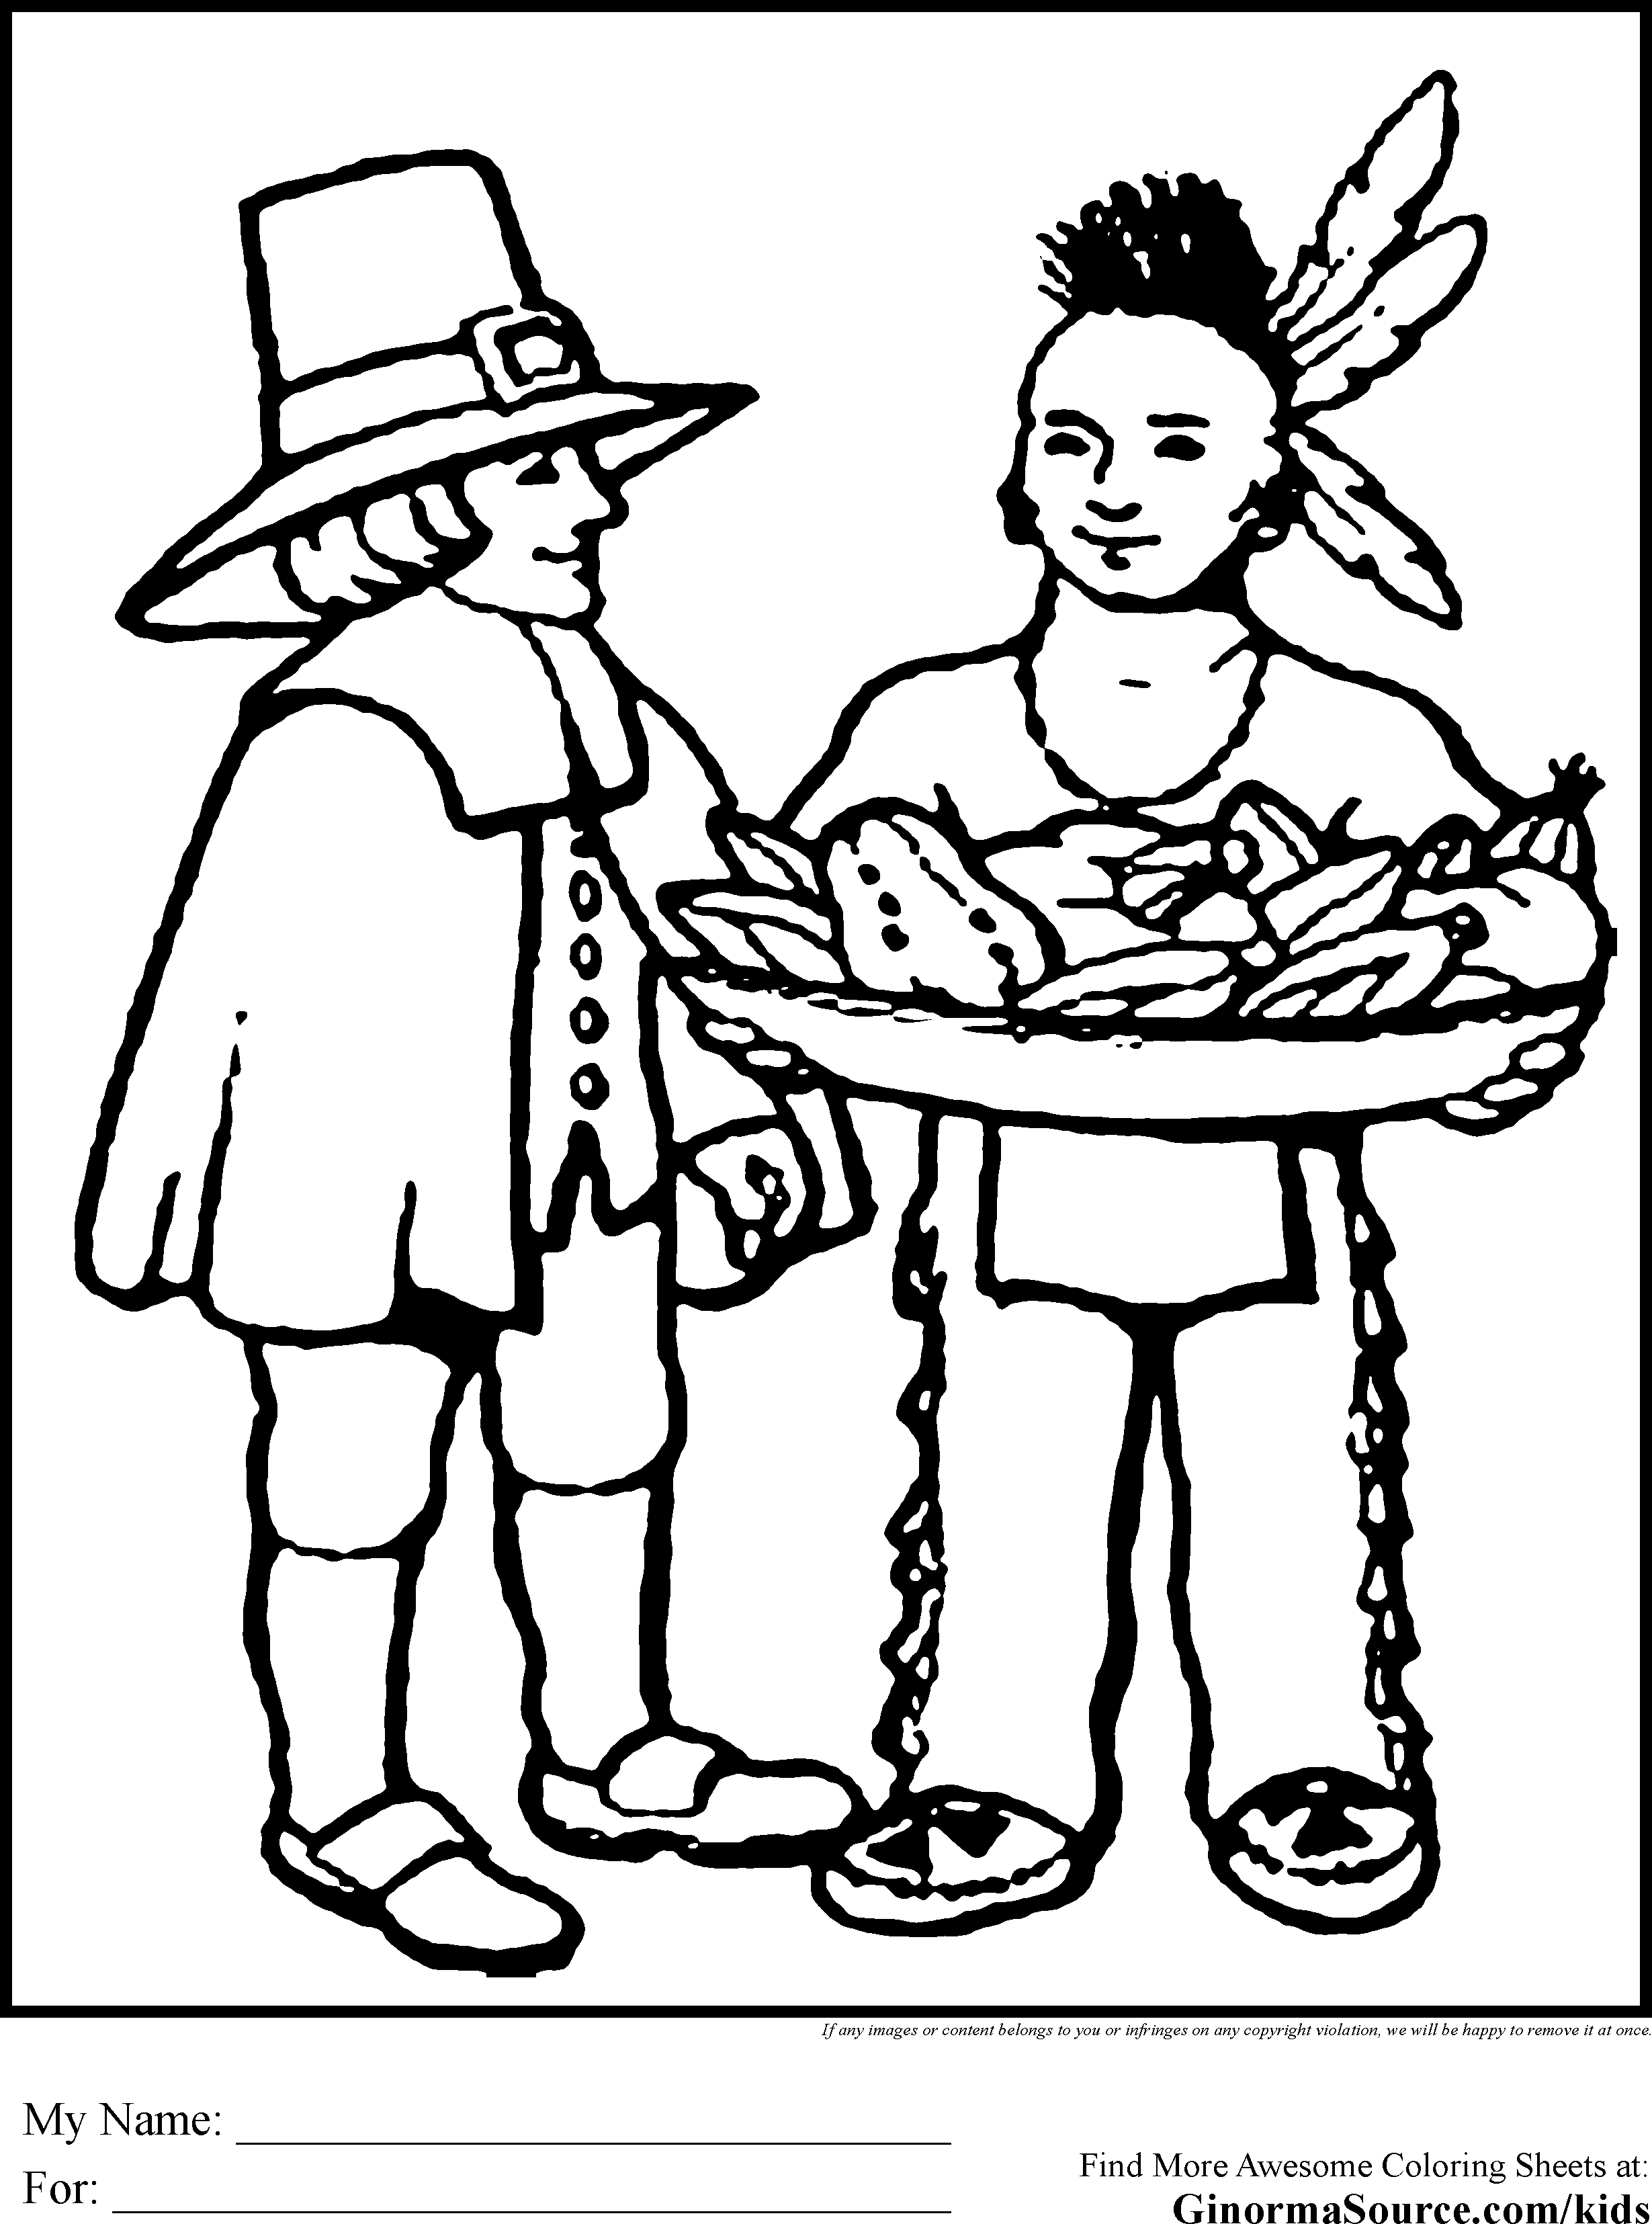 Pilgrim coloring pages to download and print for free